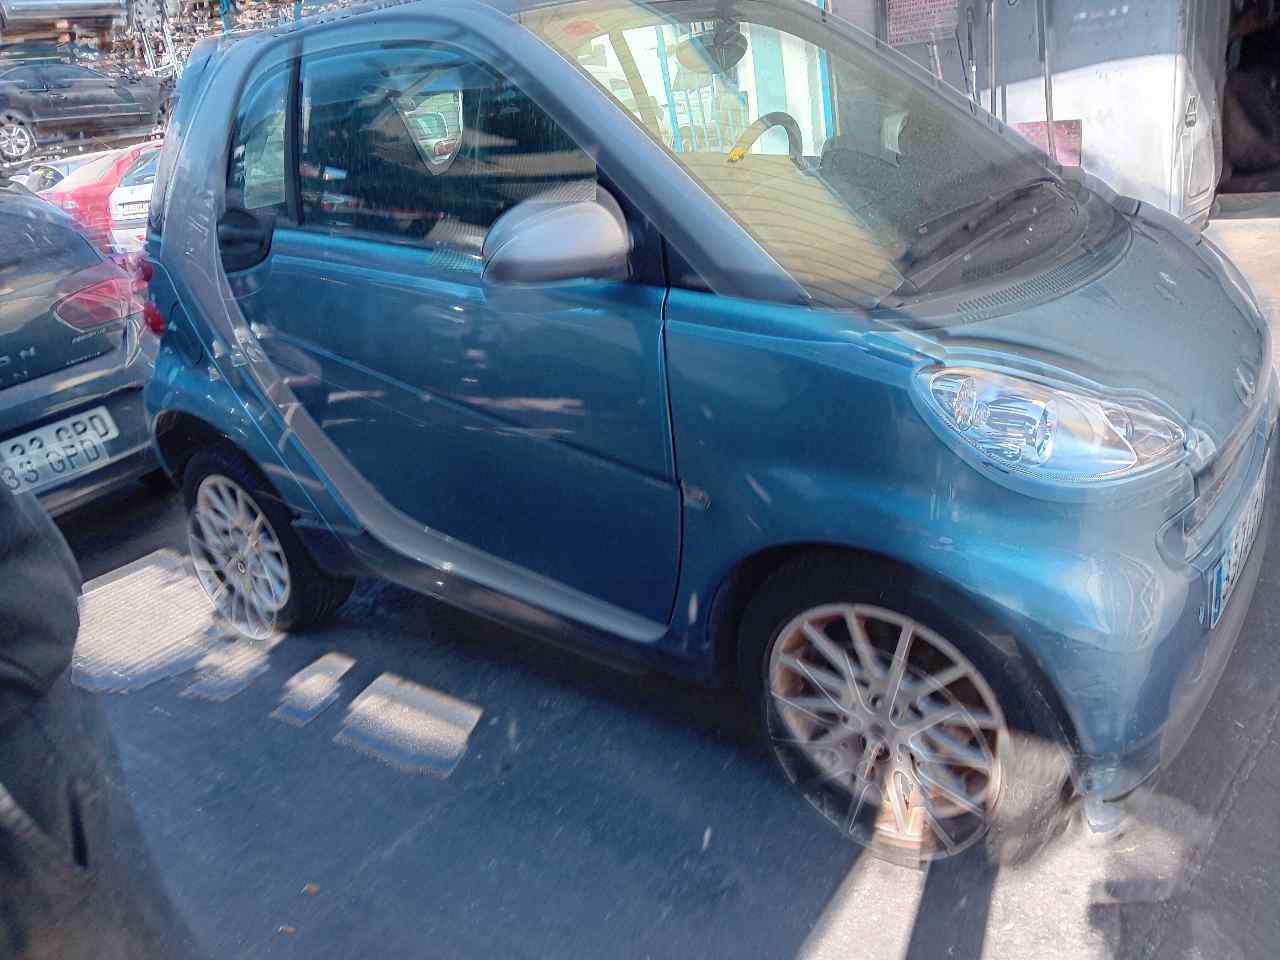 SMART Fortwo 2 generation (2007-2015) Бабина 183A028 25304064